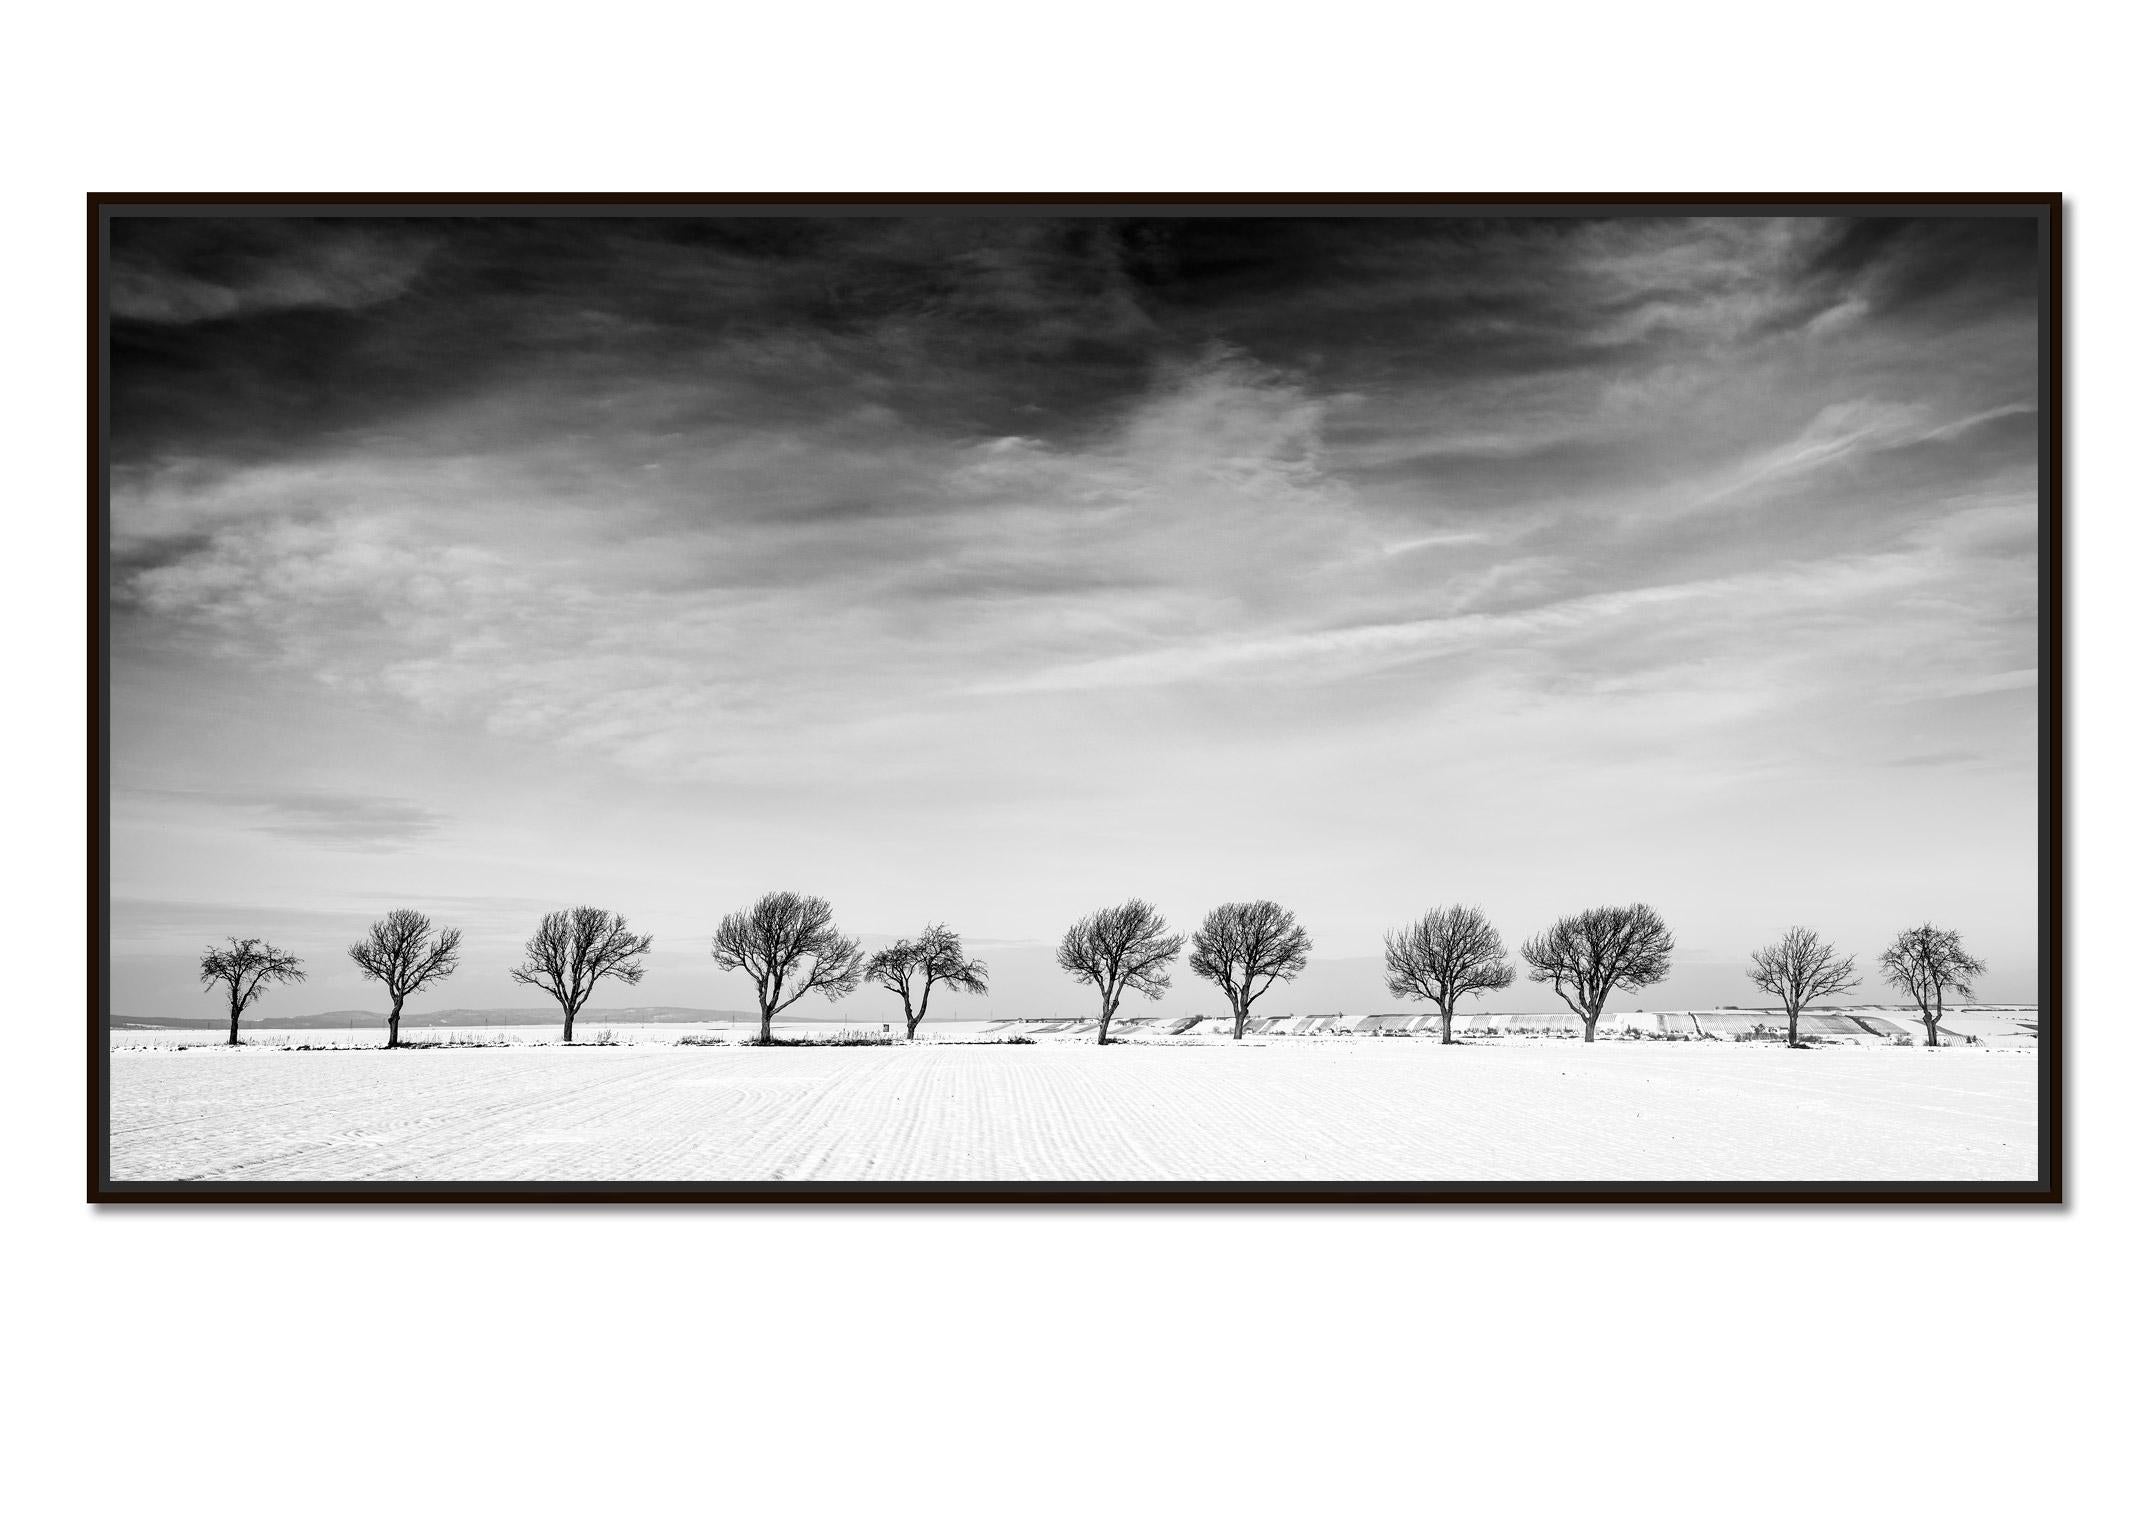 Eleven Trees in the snow Field, Austria, black and white photography, landscape - Photograph by Gerald Berghammer